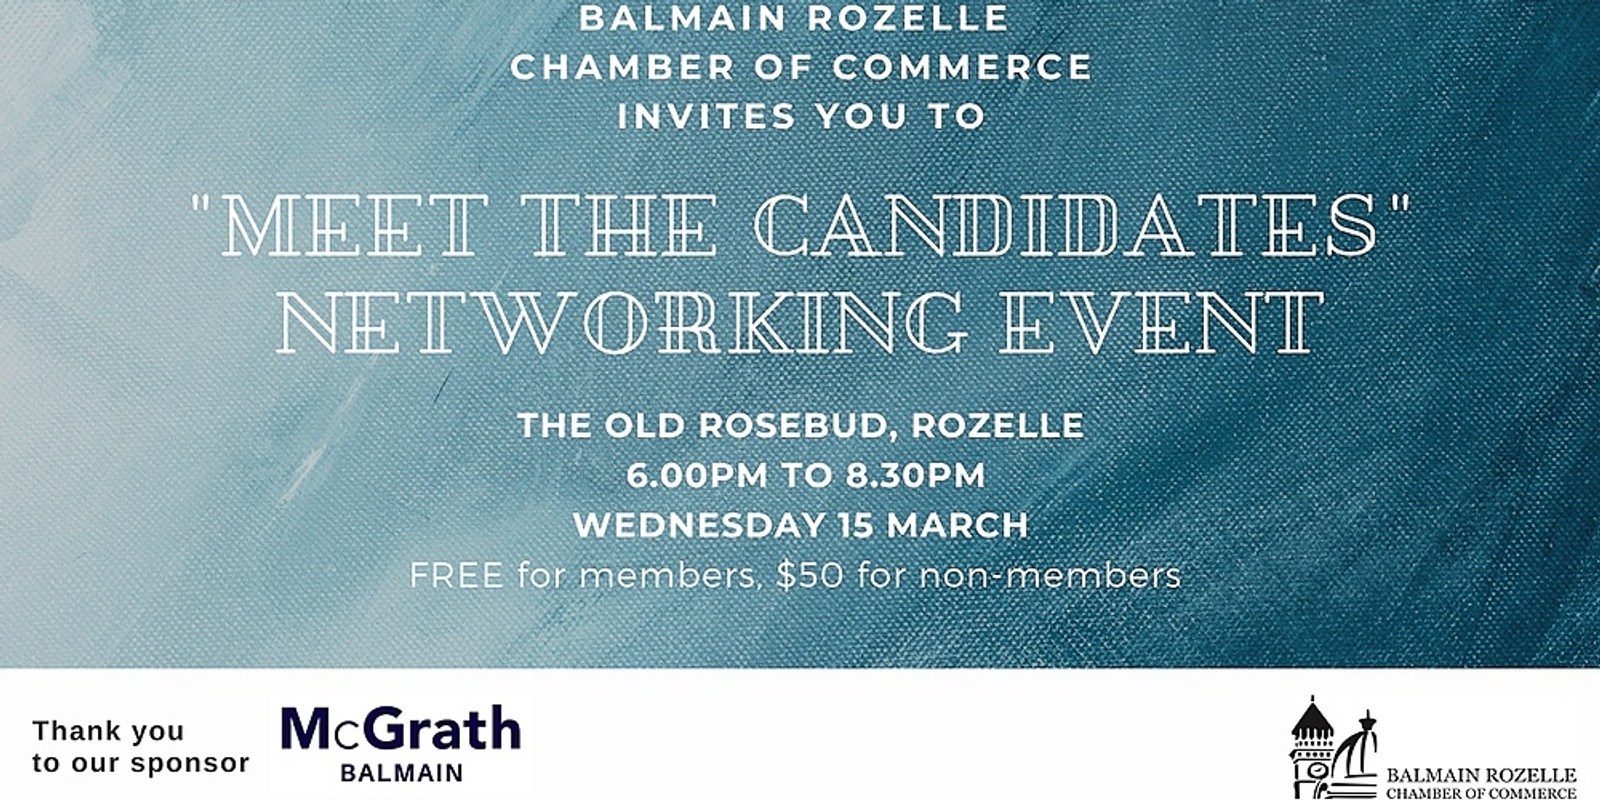 Banner image for Meet the Candidates Networking Event - Balmain Rozelle Chamber of Commerce 